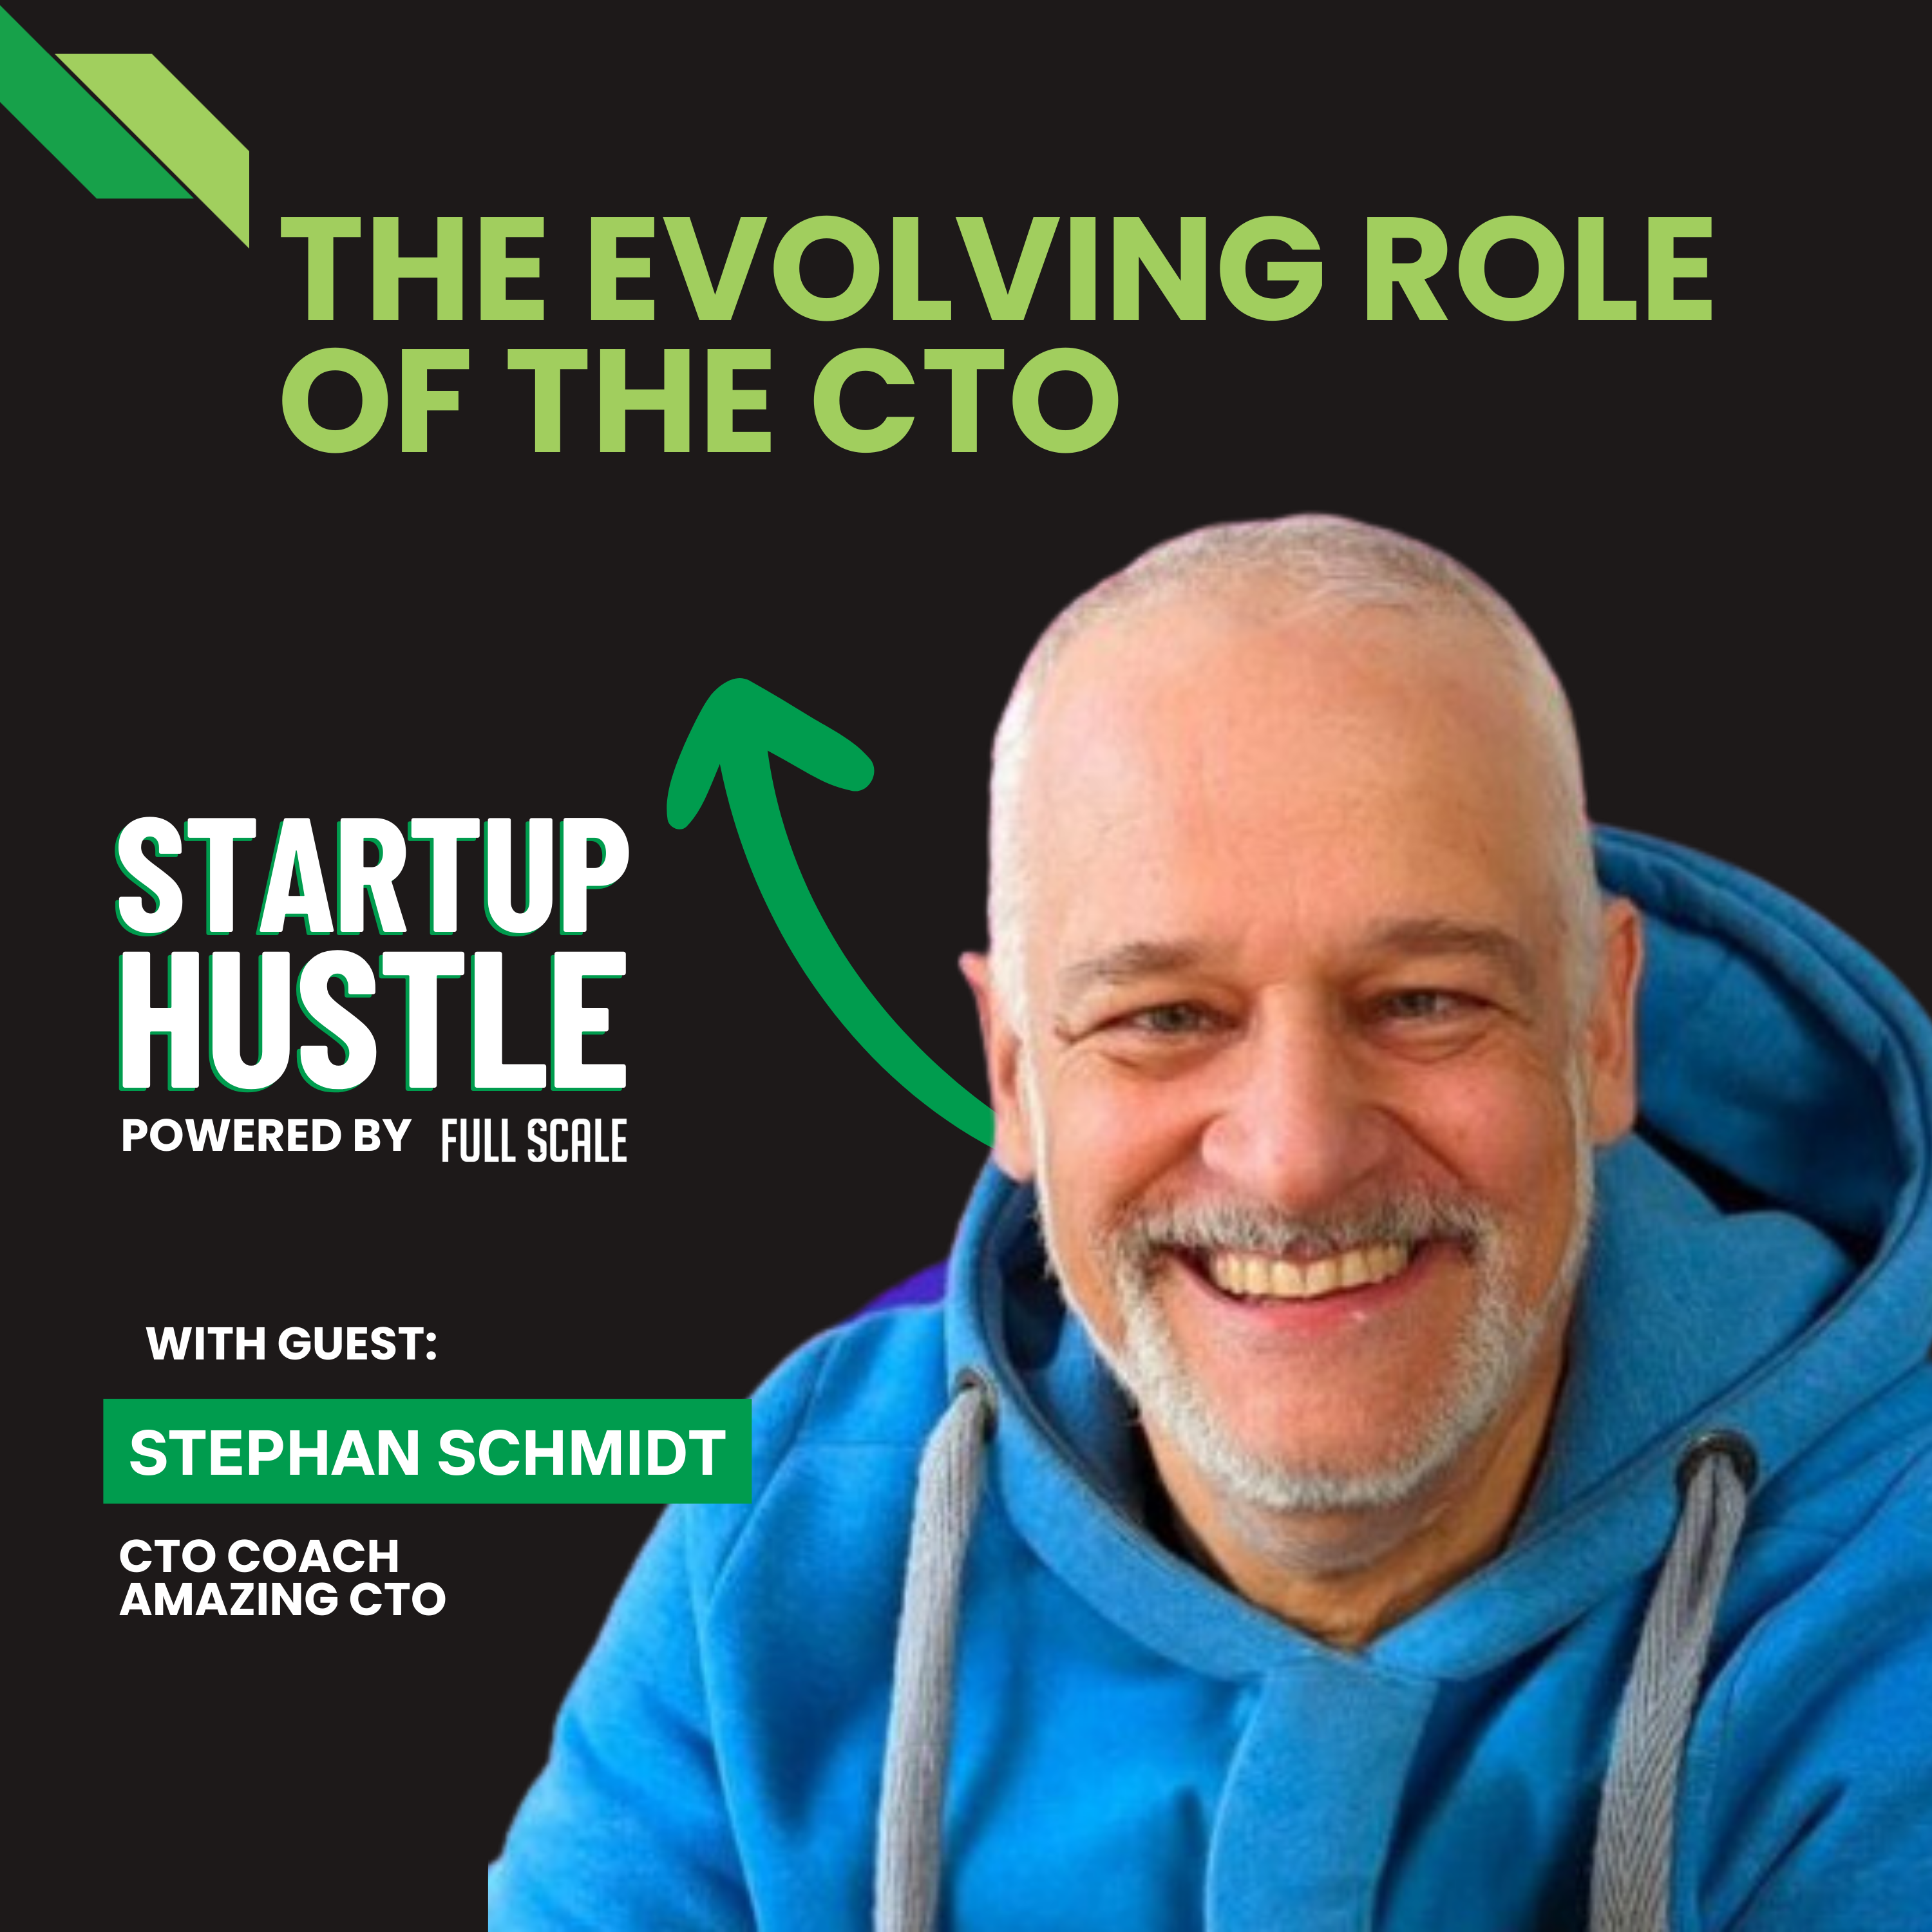 The Evolving Role of the CTO